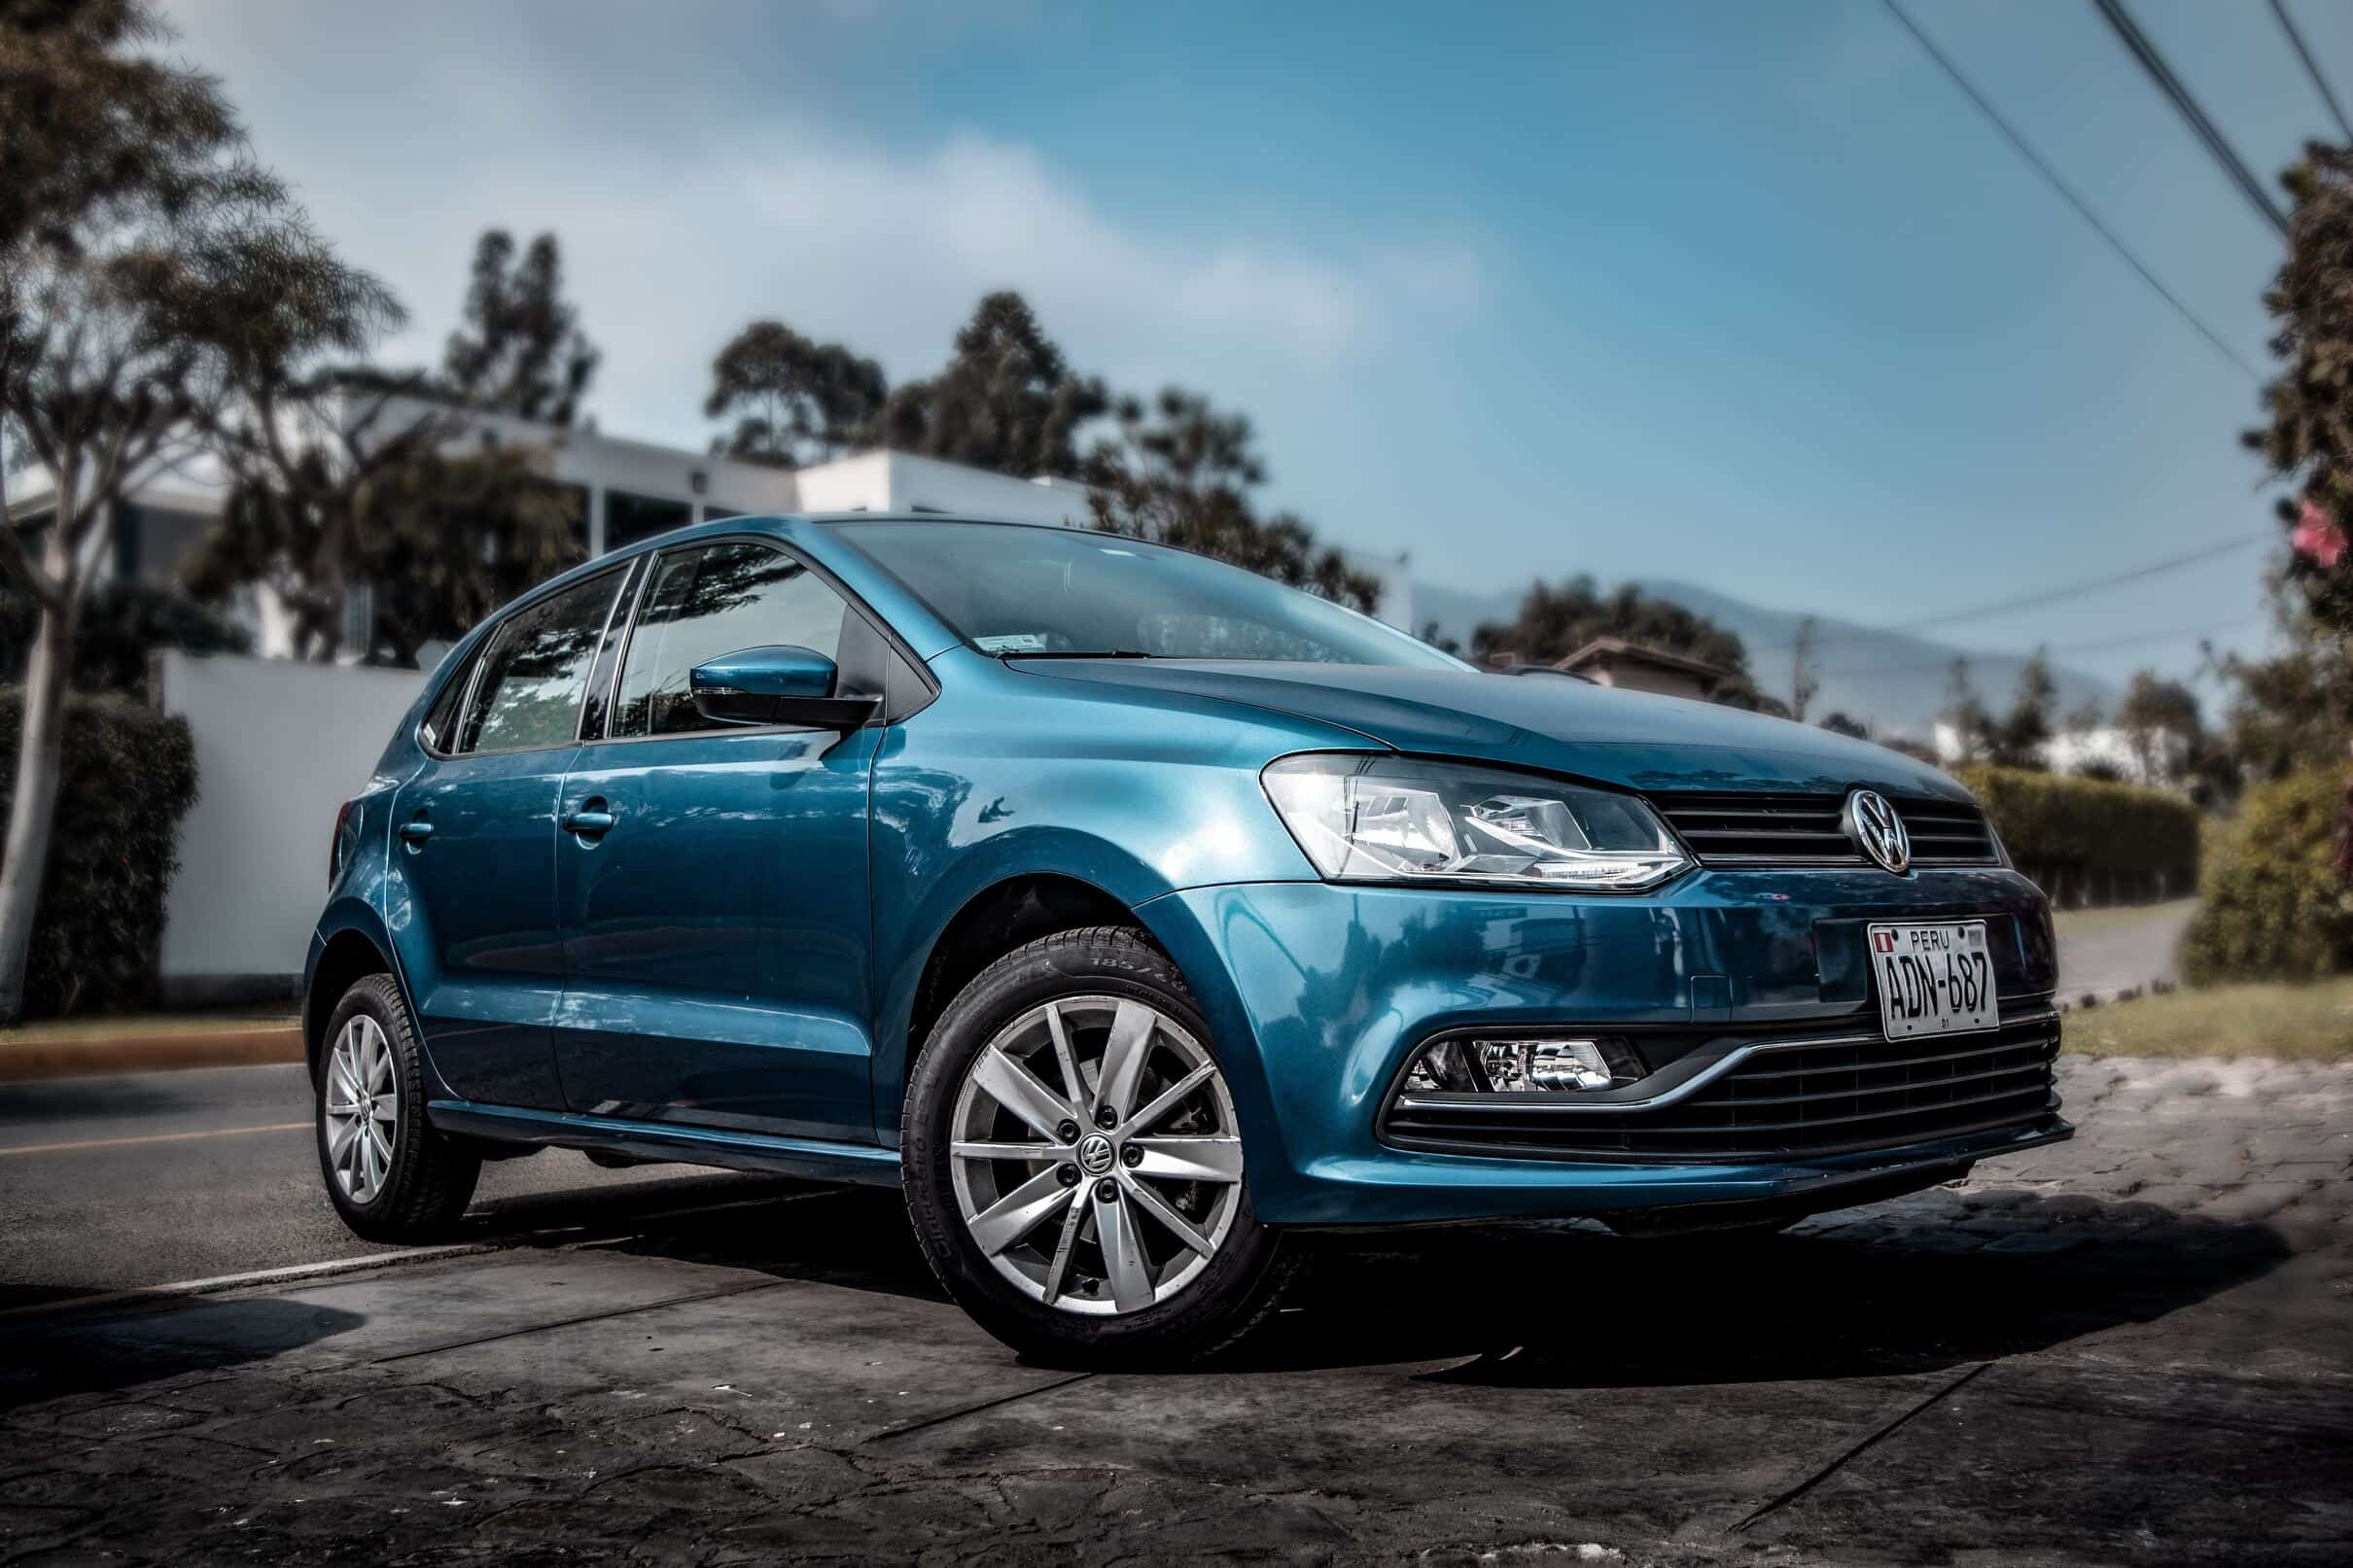 Volkswagen Polo - A Compact Hatchback Icon.

